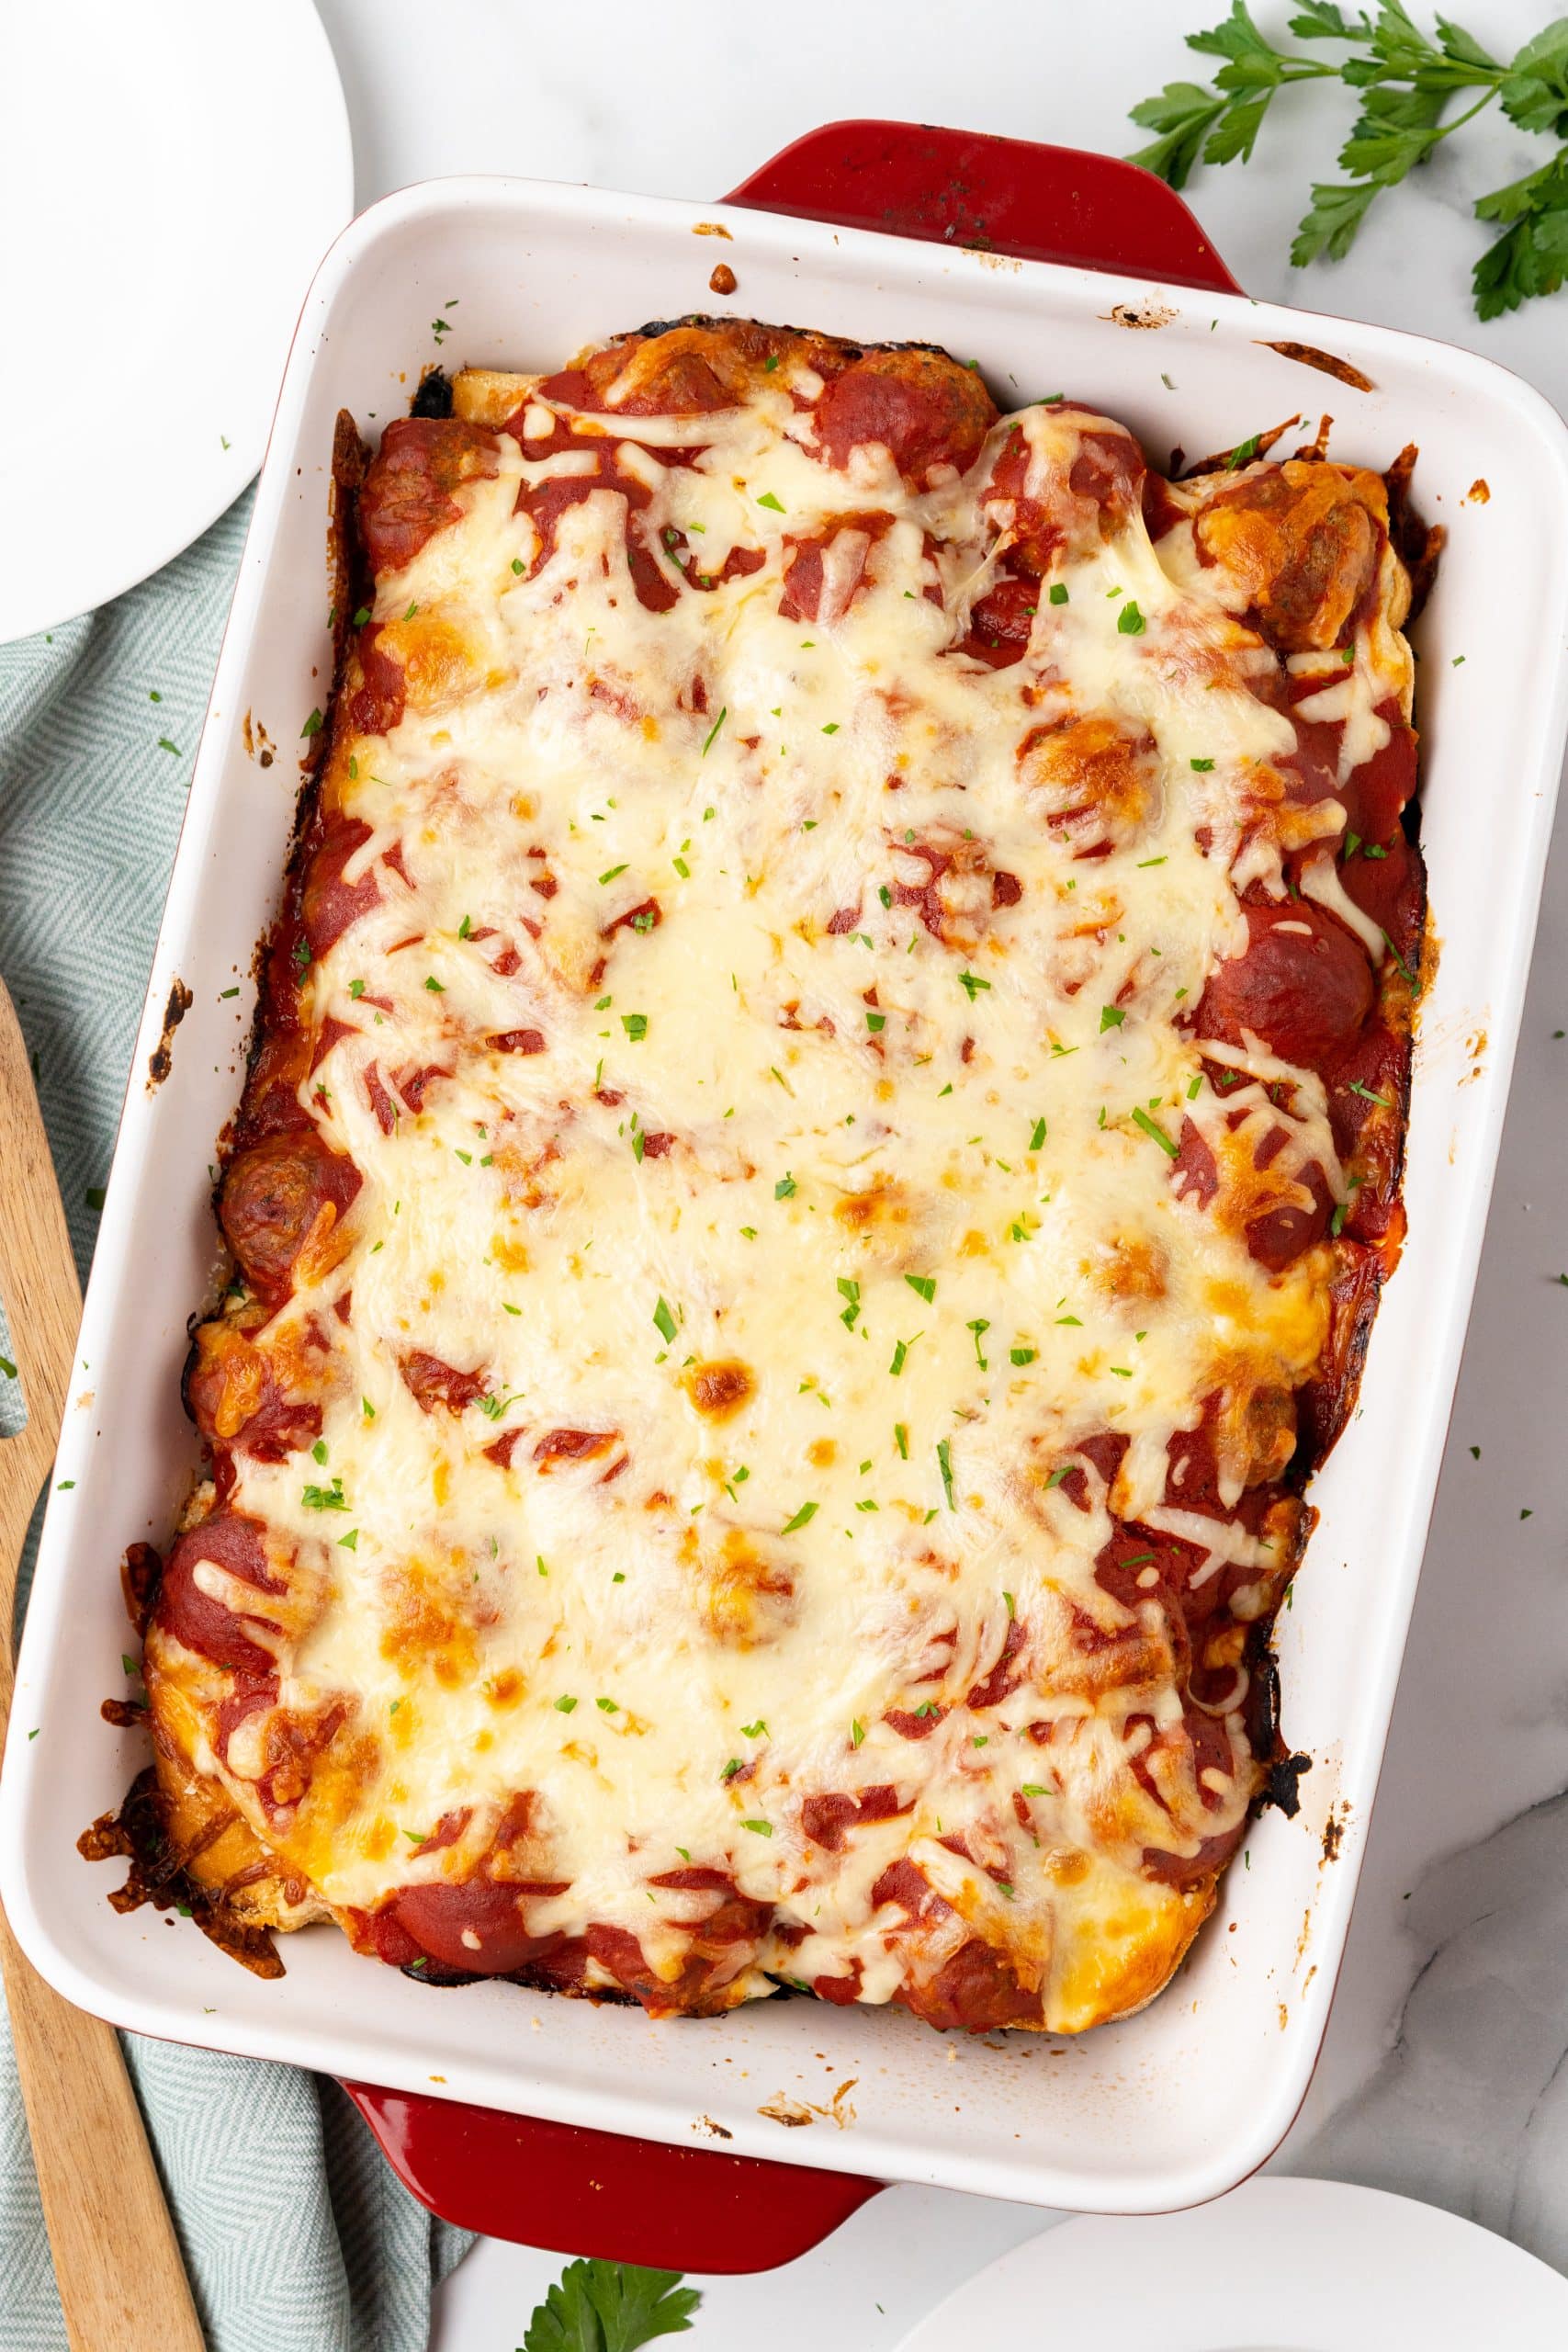 baked meatball sub casserole in a large white baking dish